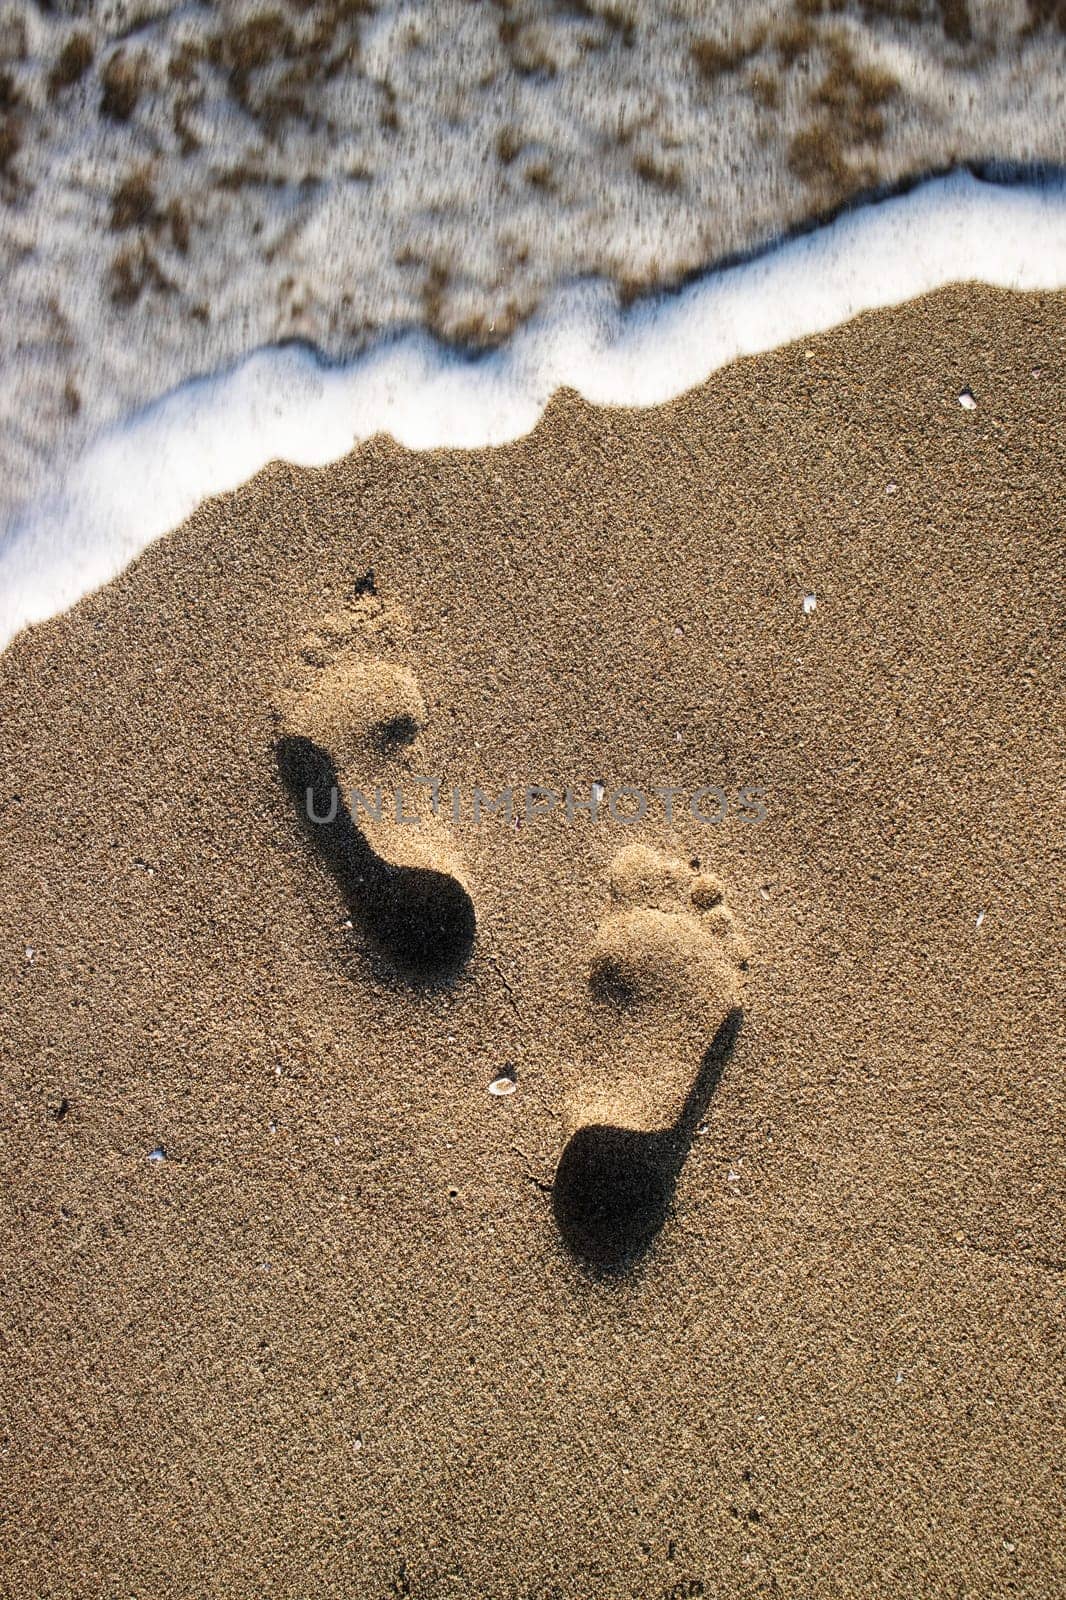 Photographic documentation human footprints in the sand  by fotografiche.eu